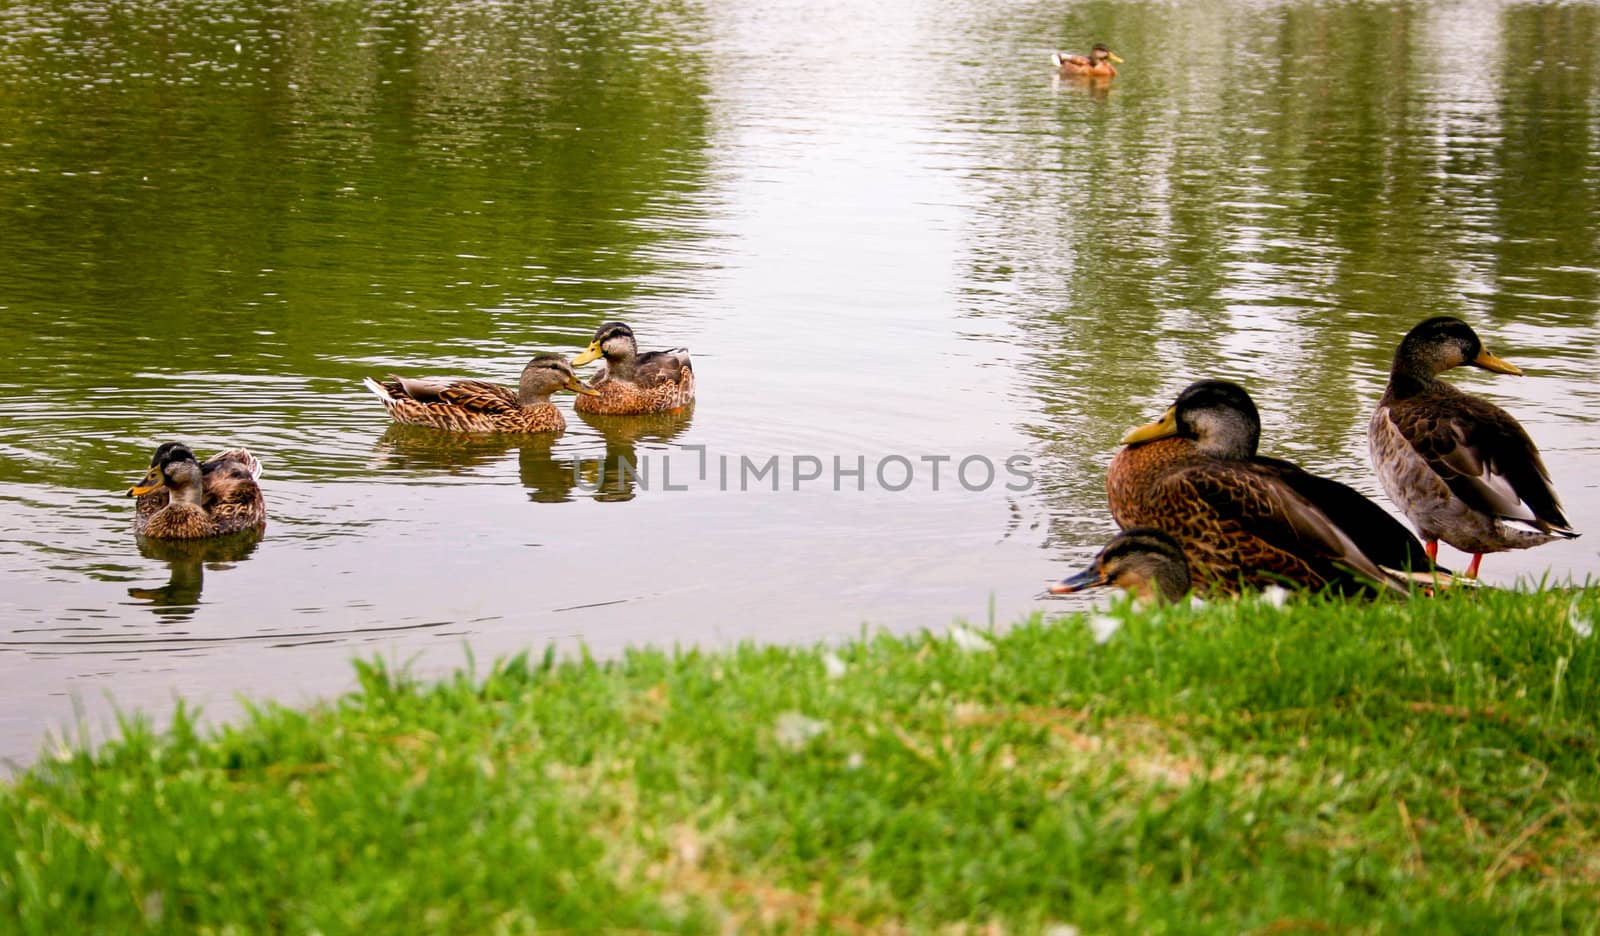 Ducks by trunion